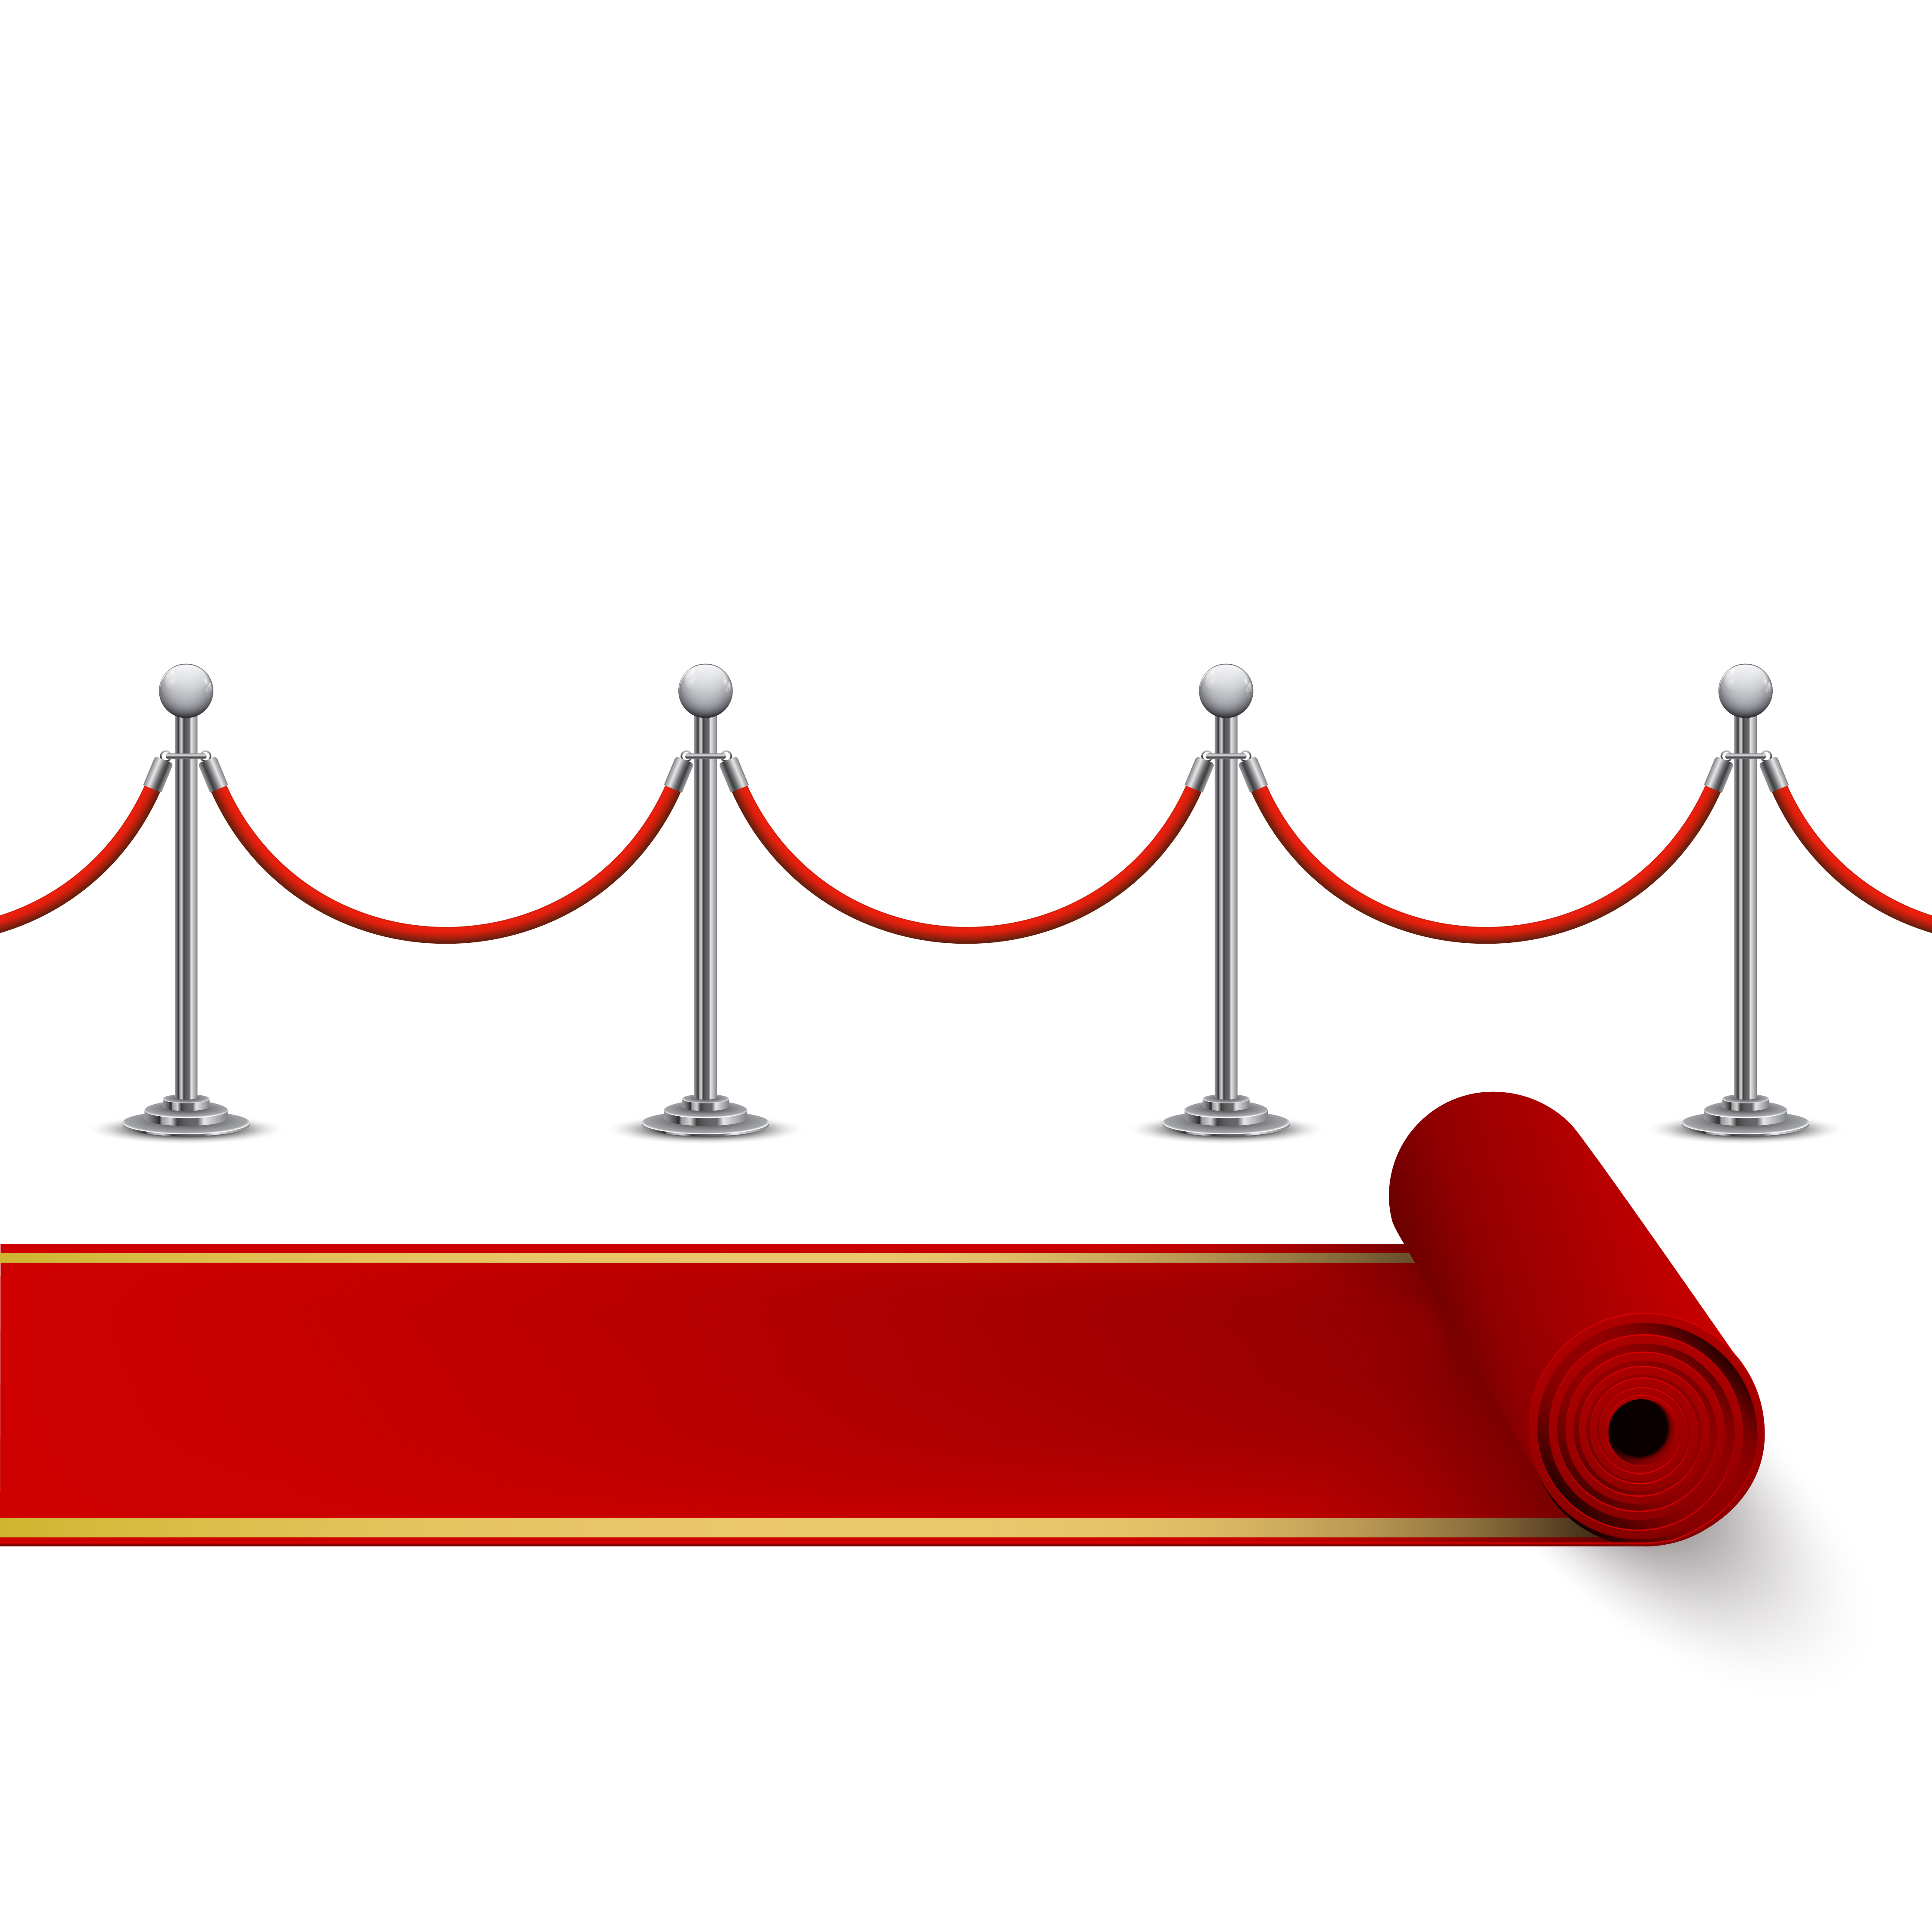 Engage Your Team to Deliver Red-Carpet Customer Service